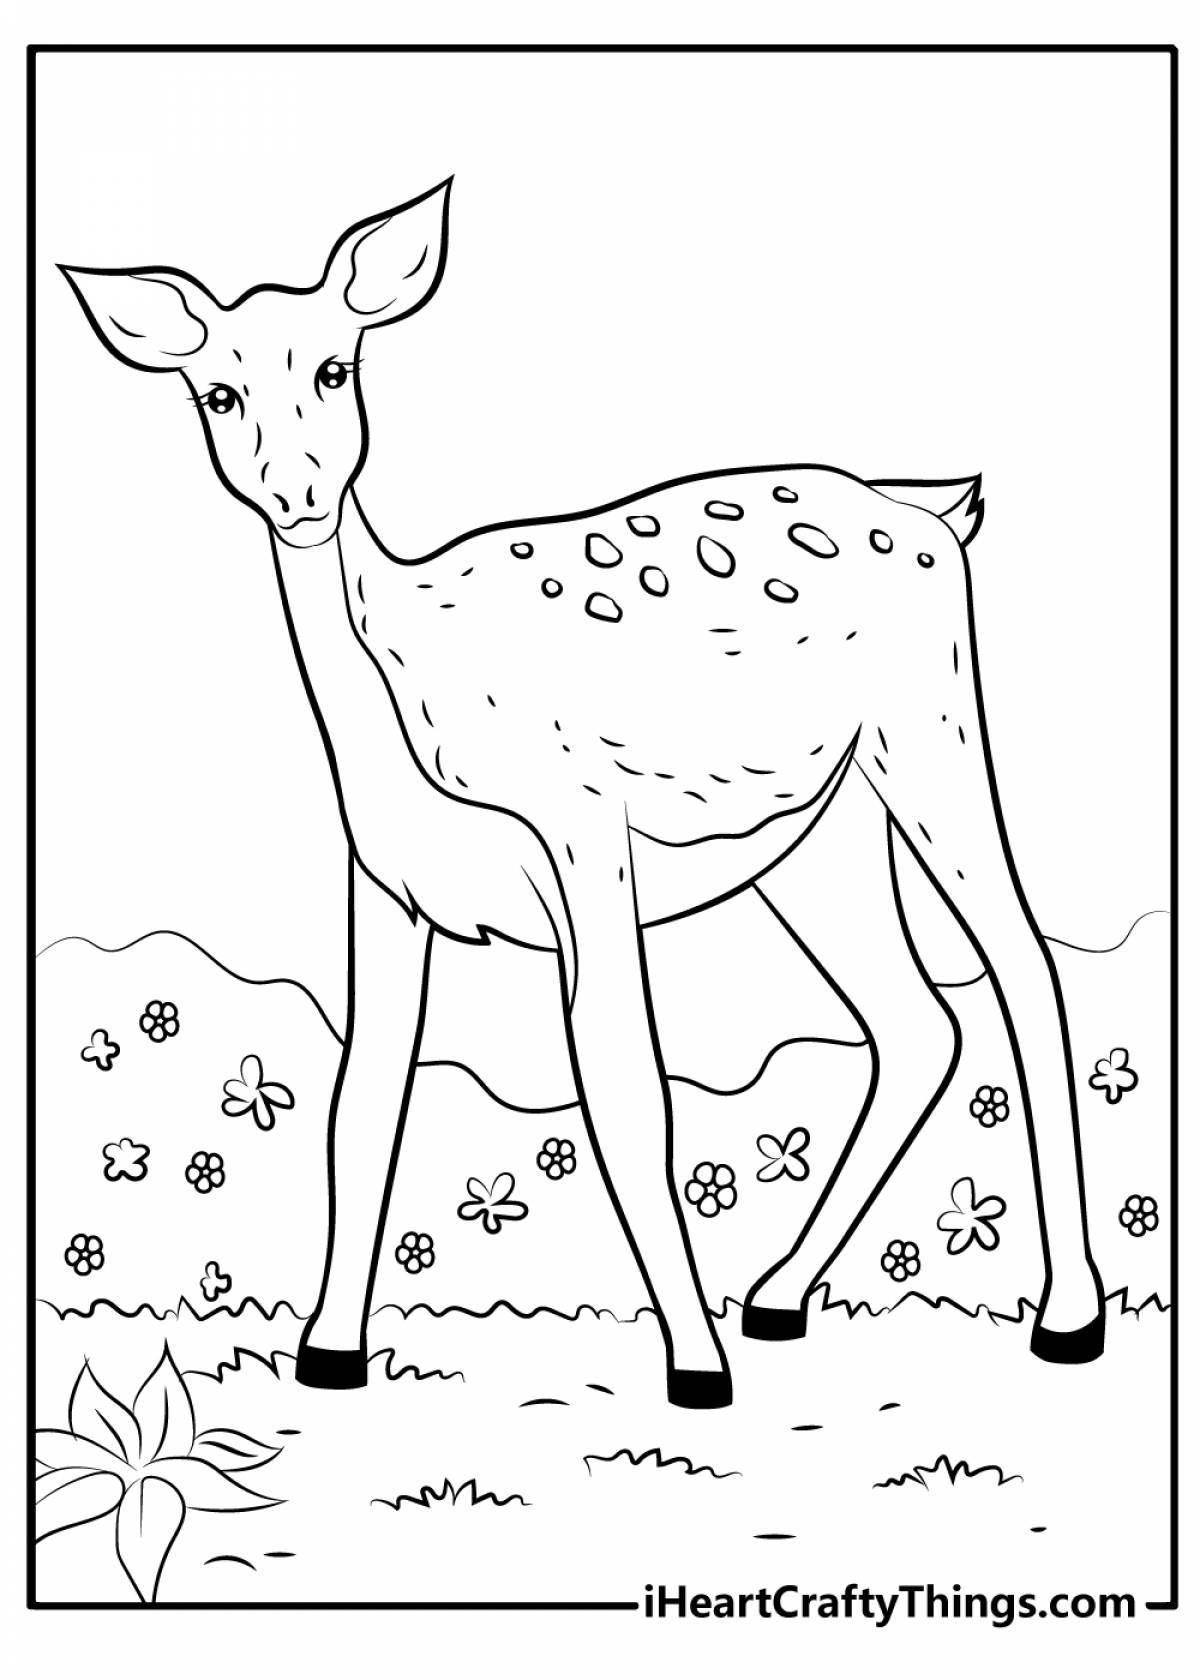 Coloring book exalted deer for children 6-7 years old